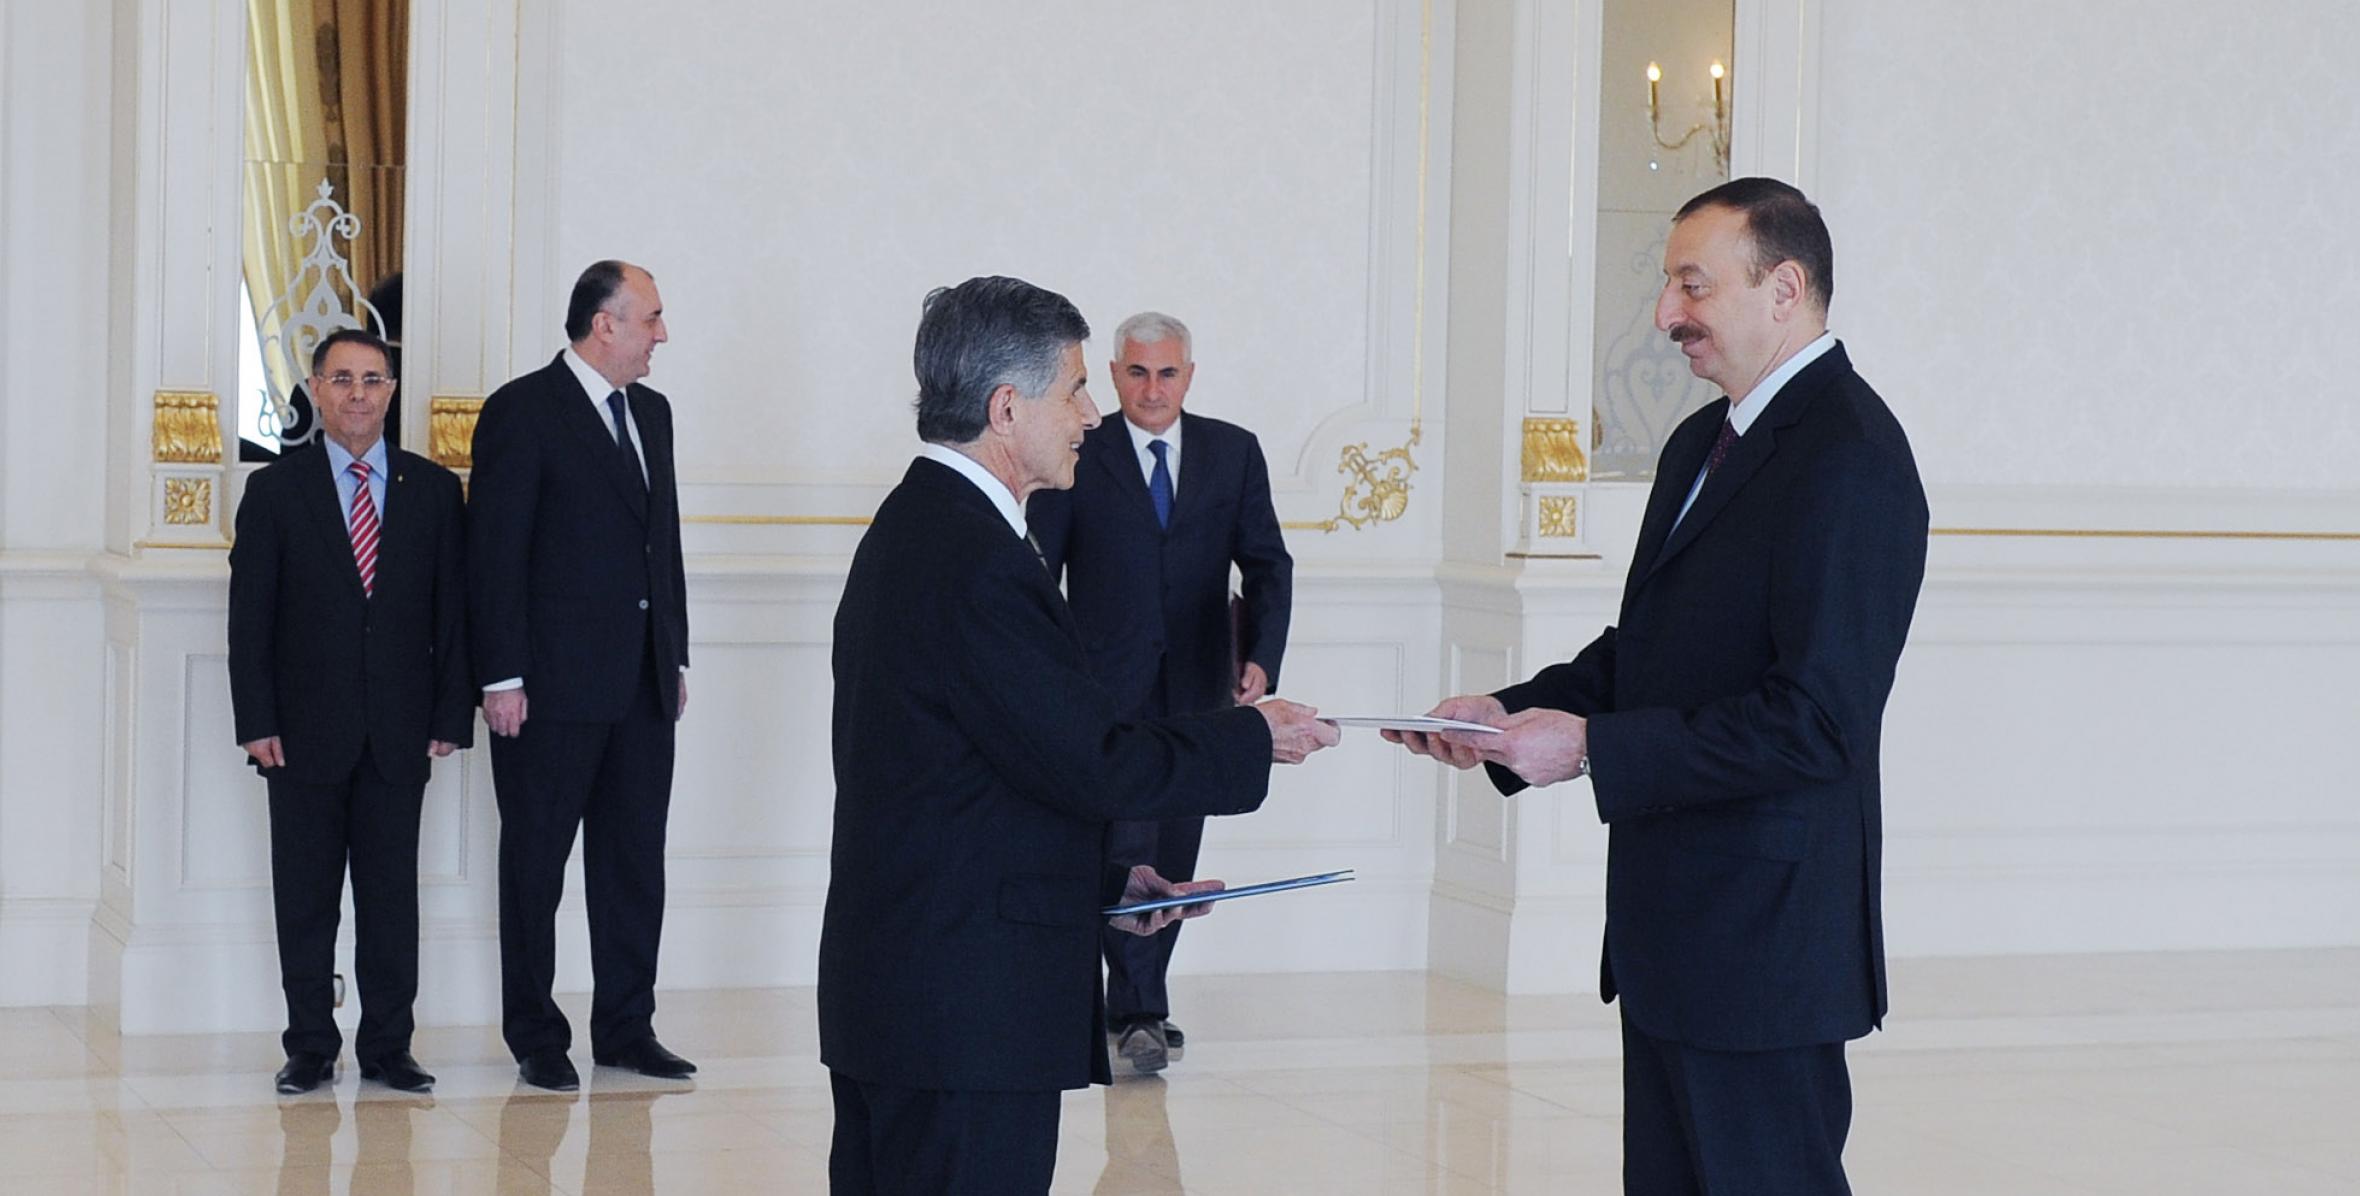 Ilham Aliyev accepted the credentials of the newly-appointed Ambassador of Brazil to Azerbaijan, Sergio De Souza Fontes Arruda